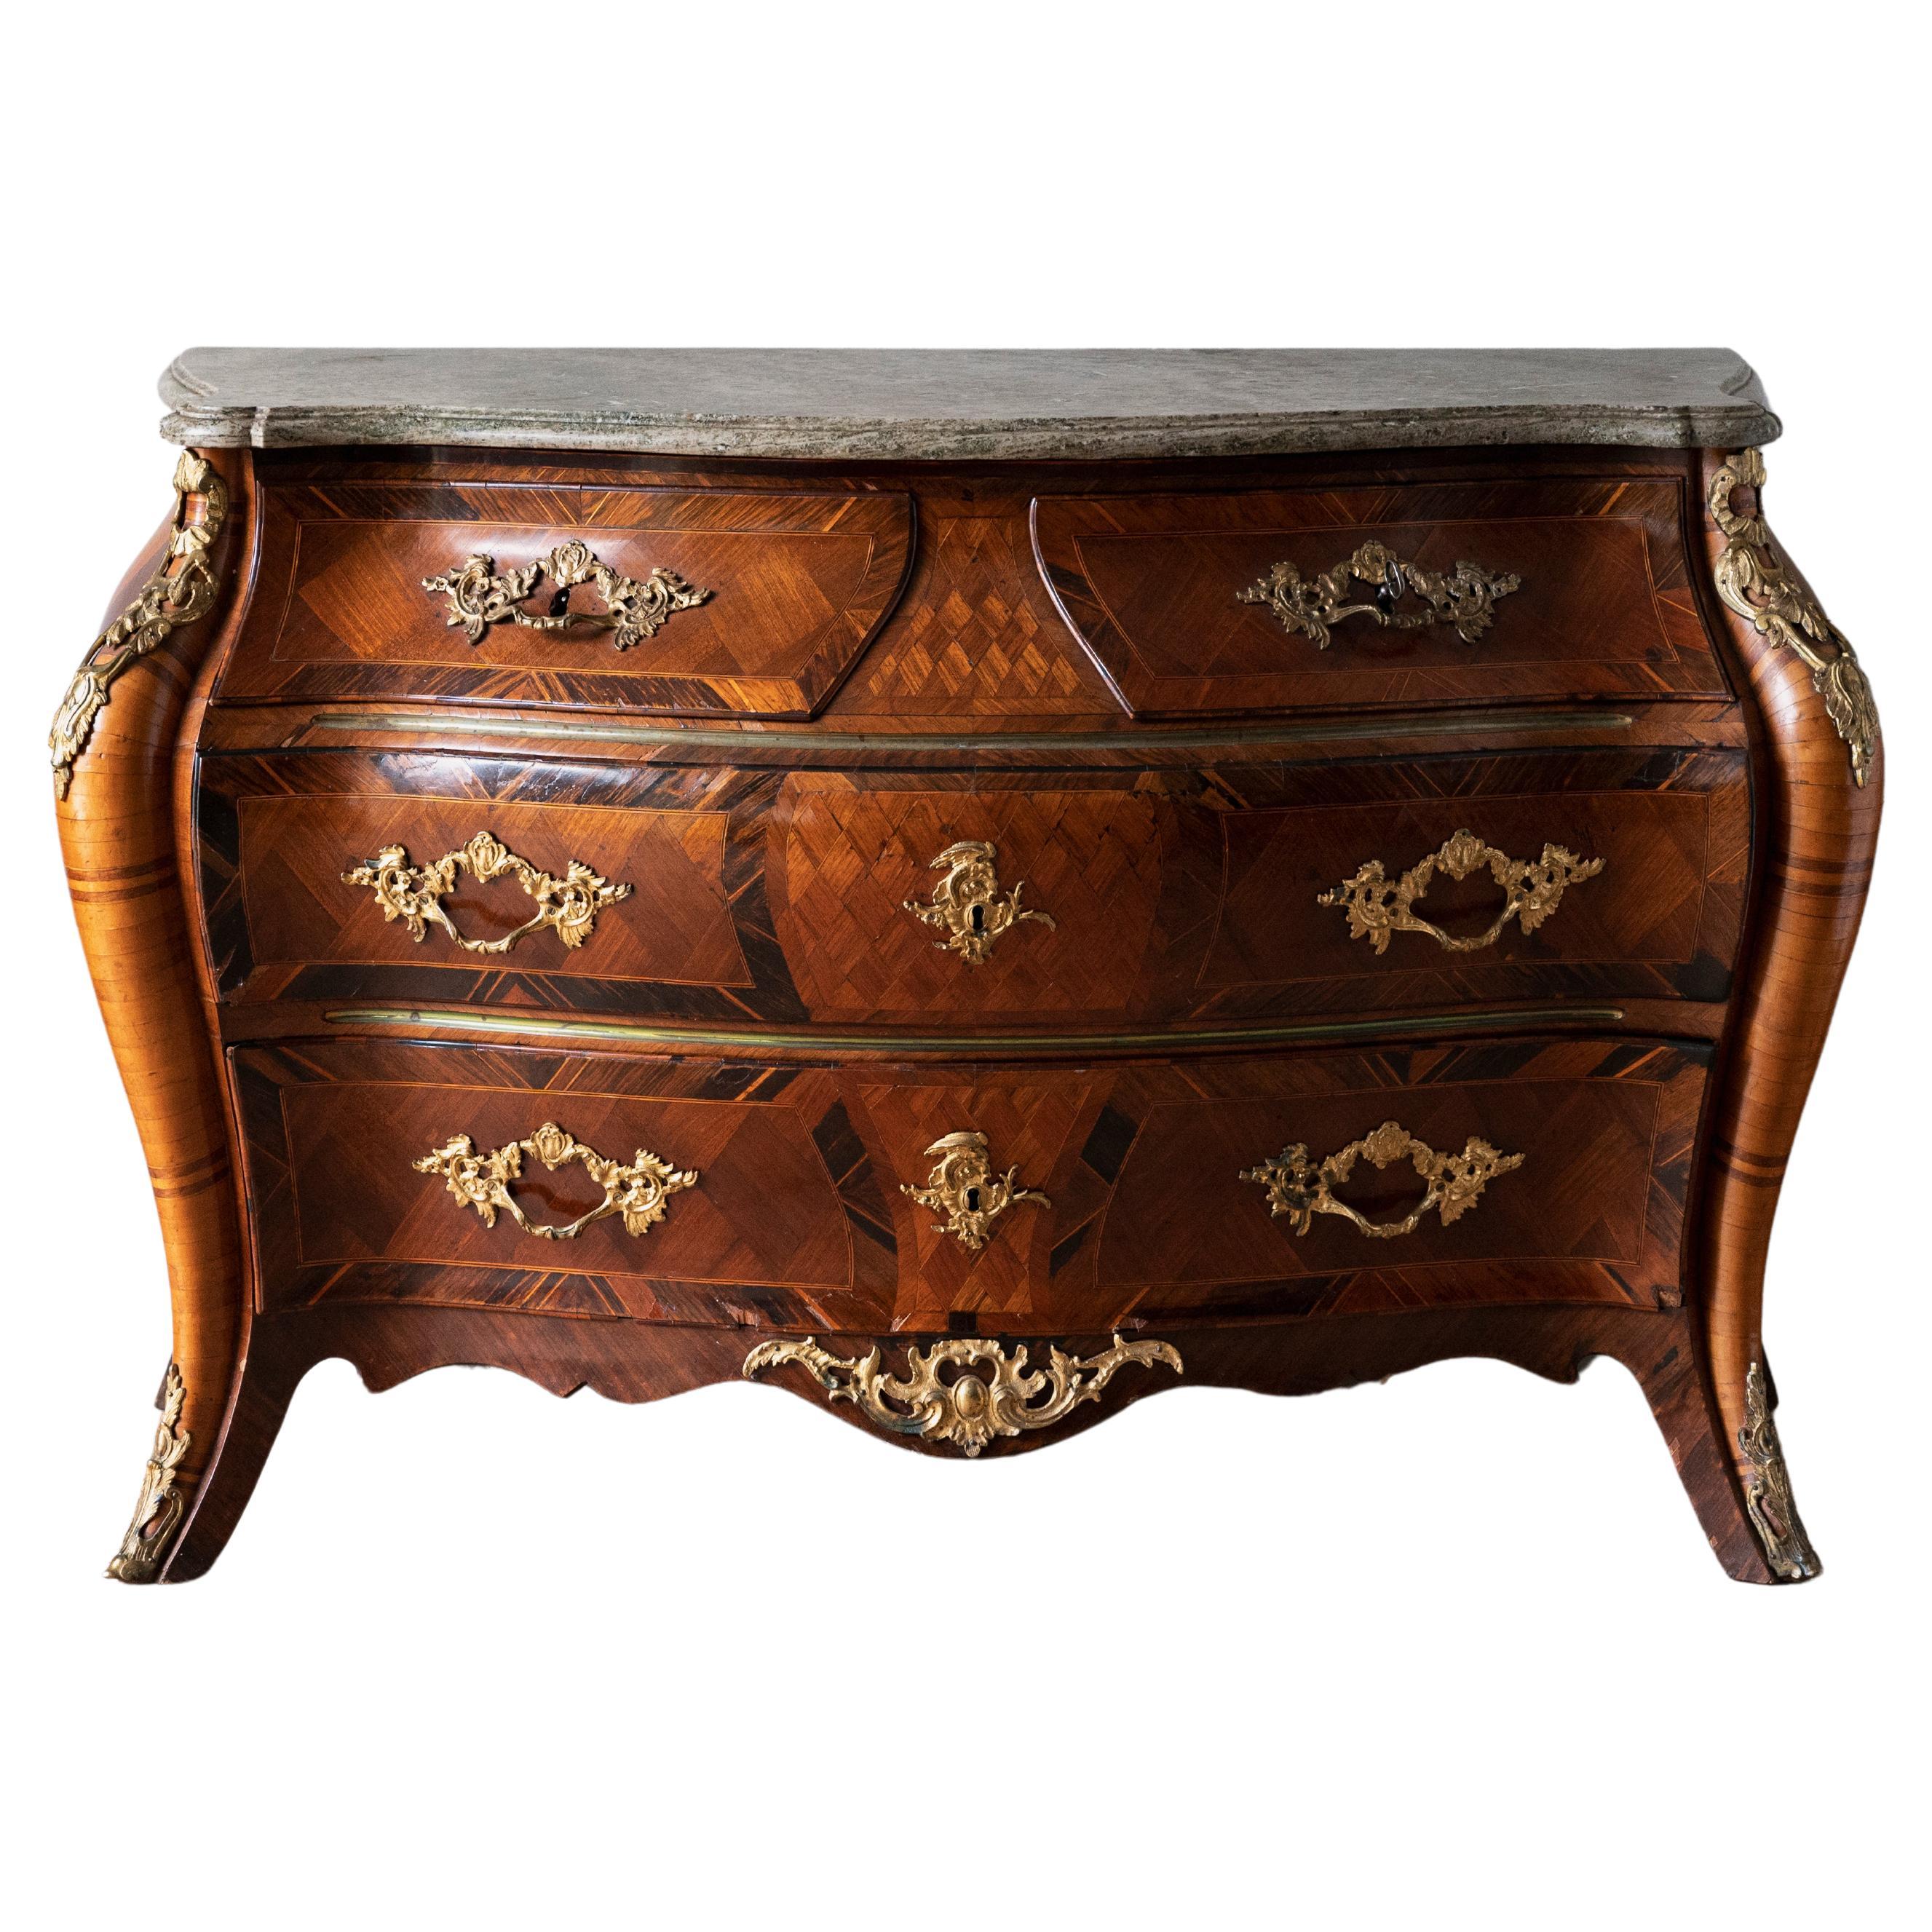 Exceptional 18th Century Swedish Rococo Commode For Sale